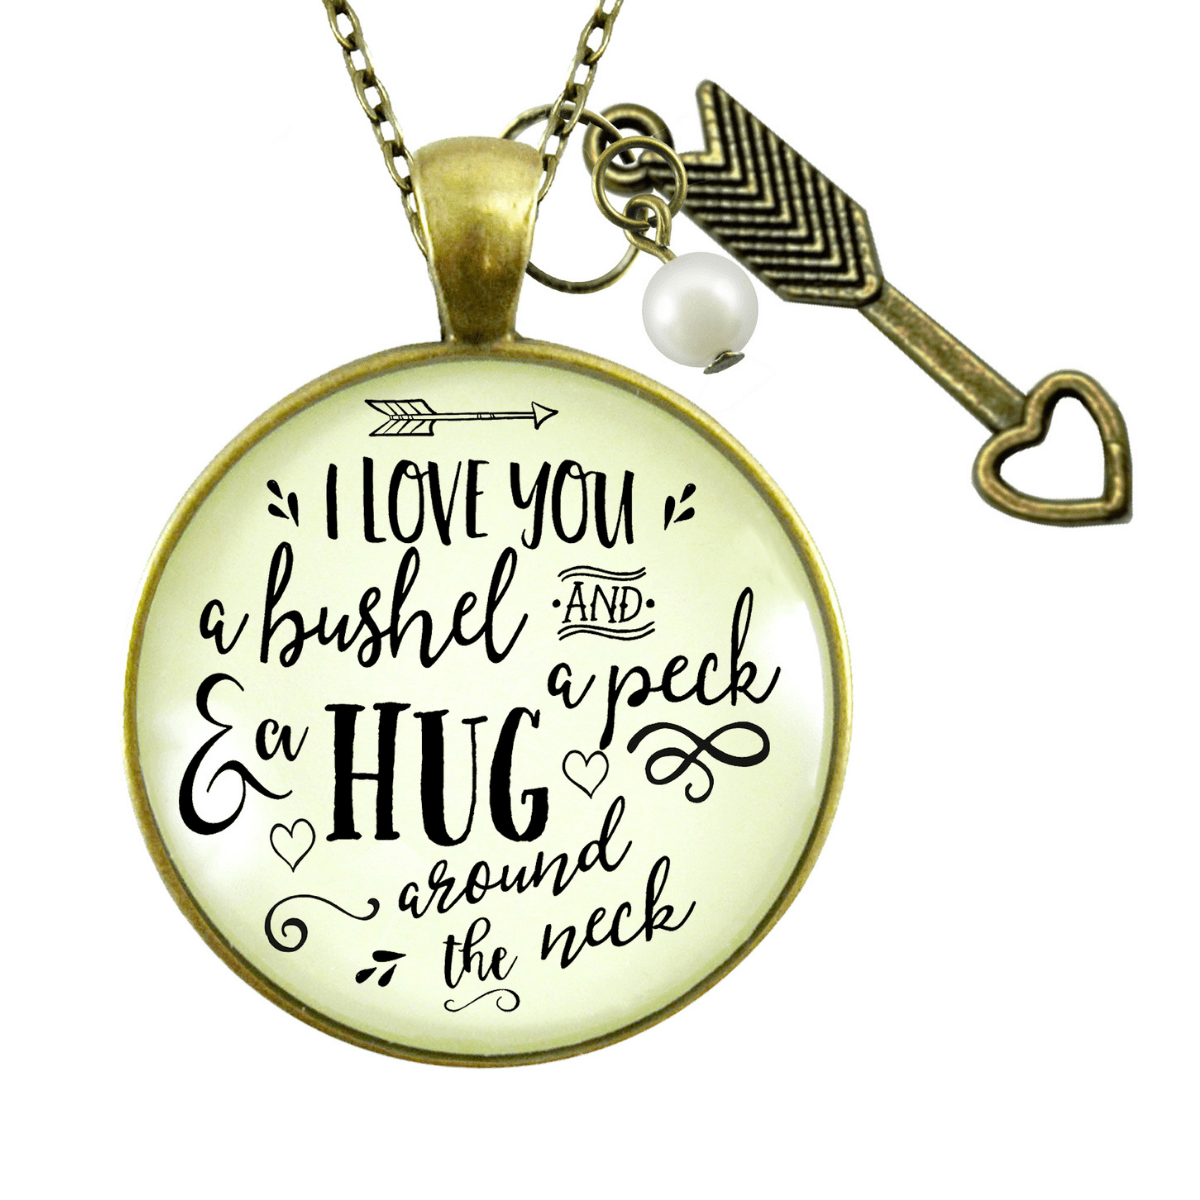 Gutsy Goodness I Love You To The Moon and Back Necklace Inspire Jewelry Half Moon Heart Charm - Gutsy Goodness;I Love You To The Moon And Back Necklace Inspire Jewelry Half Moon Heart Charm - Gutsy Goodness Handmade Jewelry Gifts